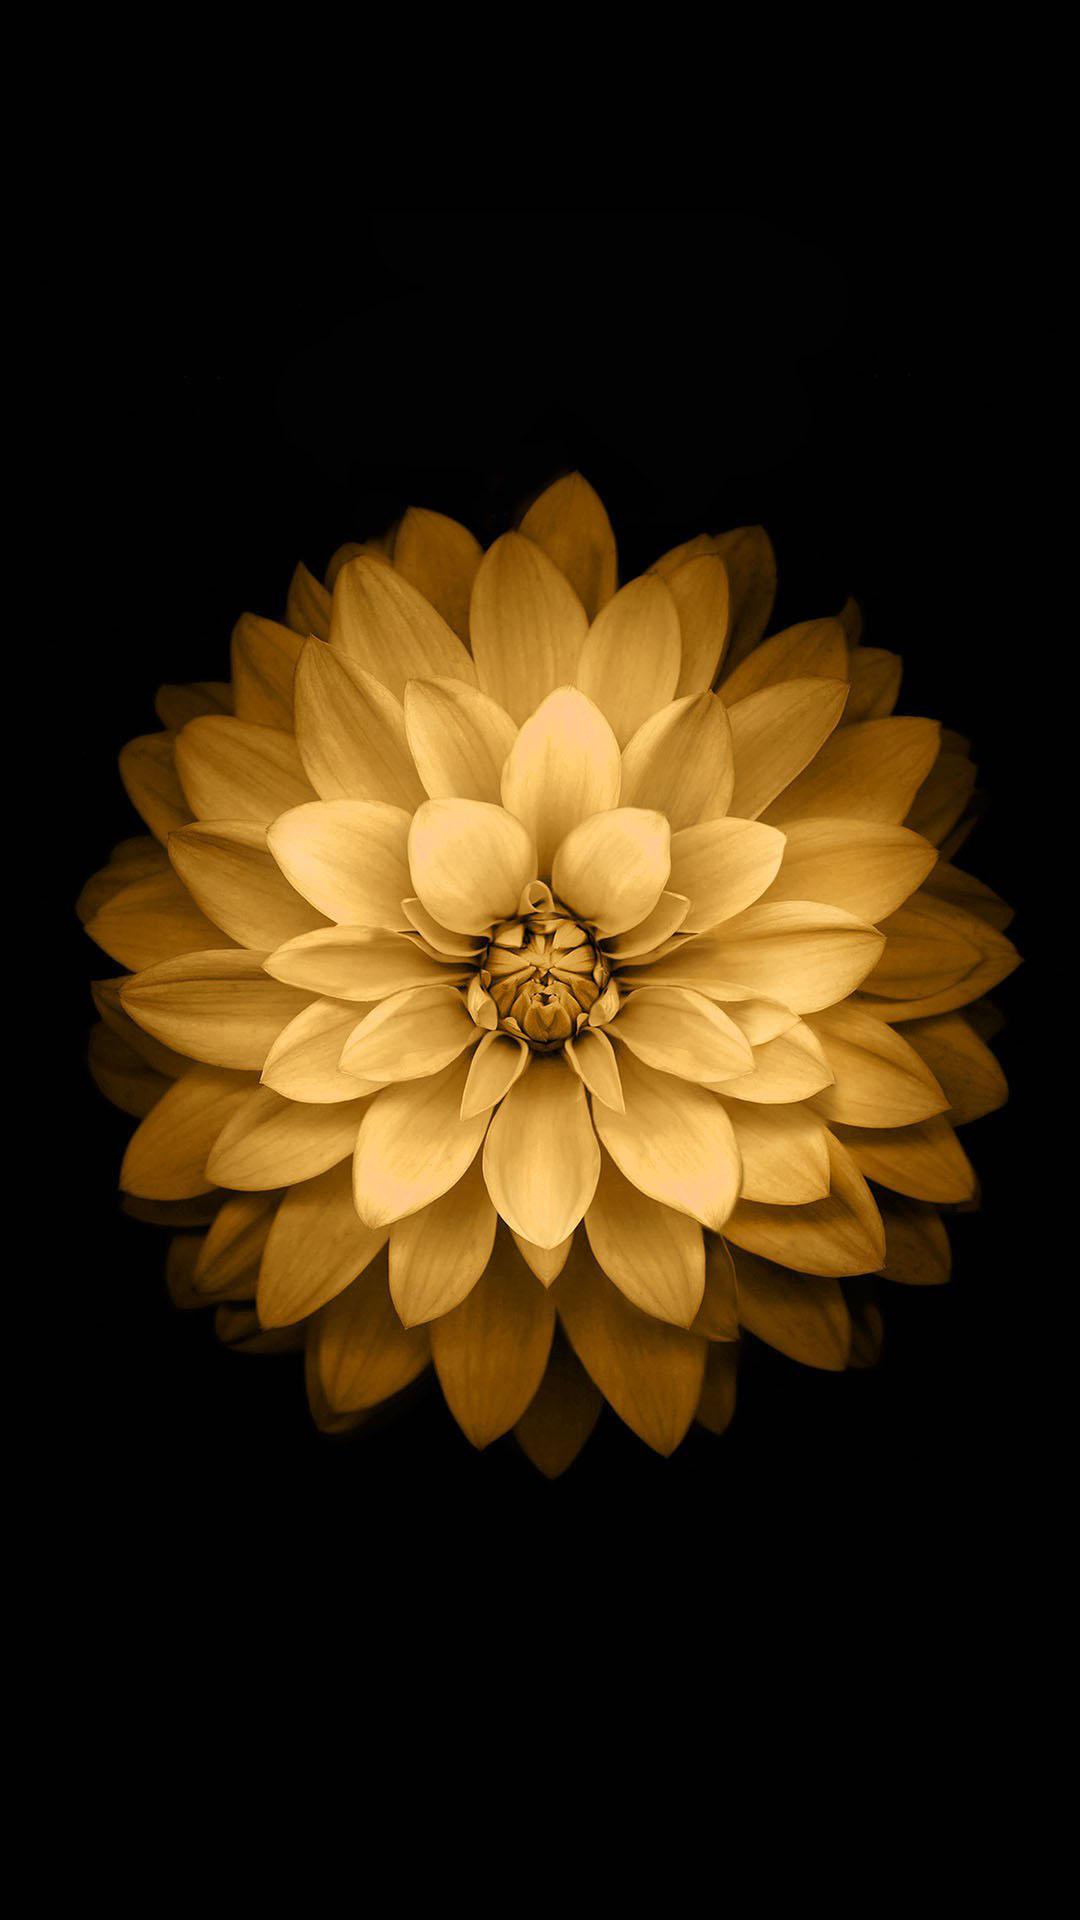 Golden Lotus Flower iOS Android Wallpaper free download